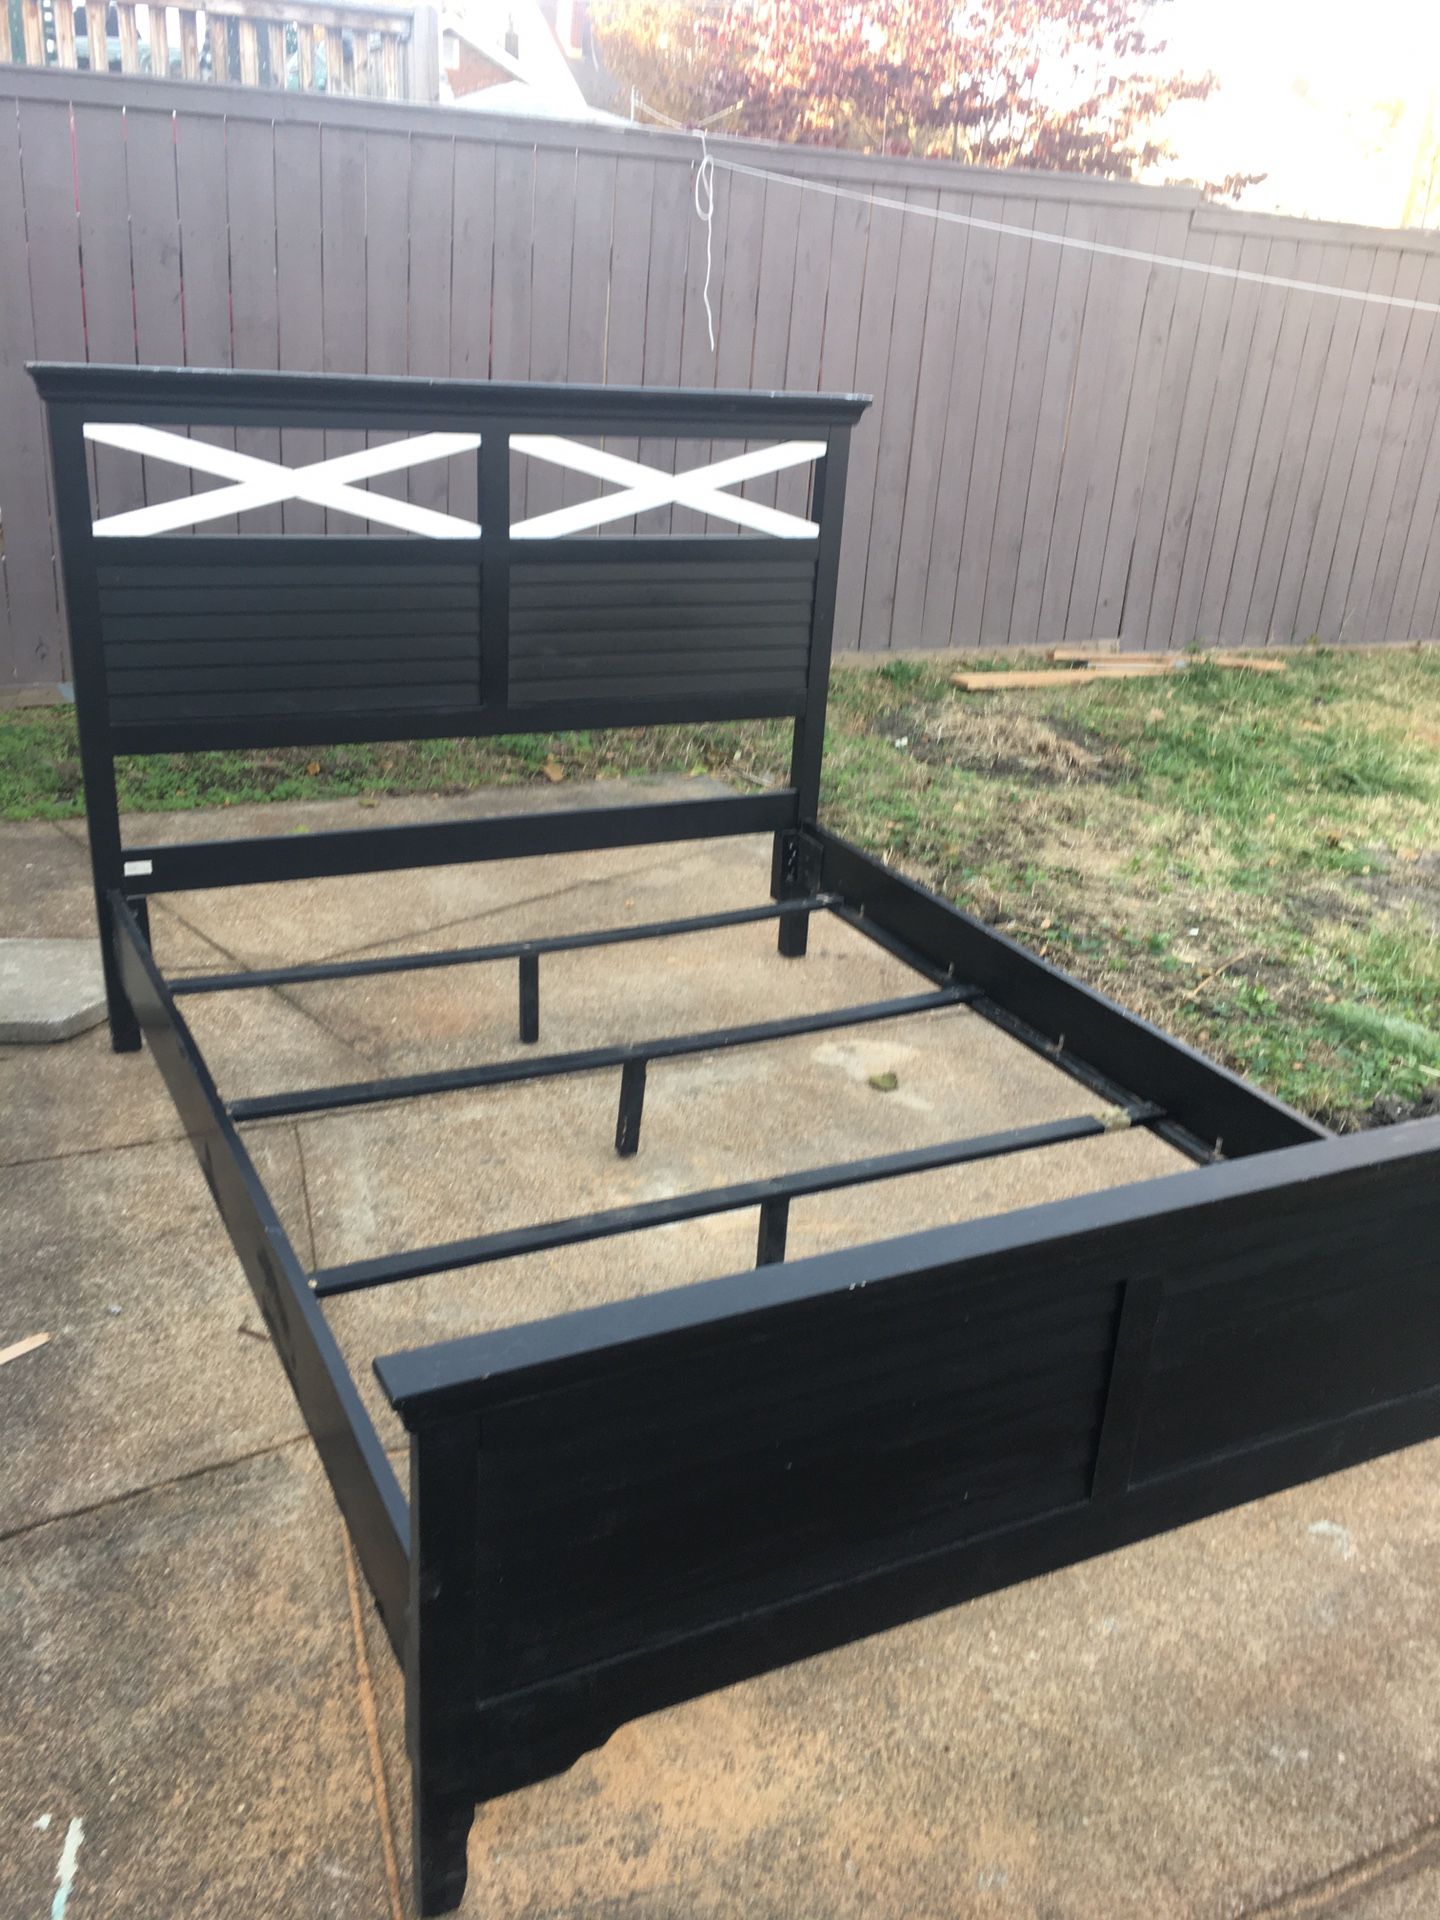 Queen bed frame and mattress +box spring